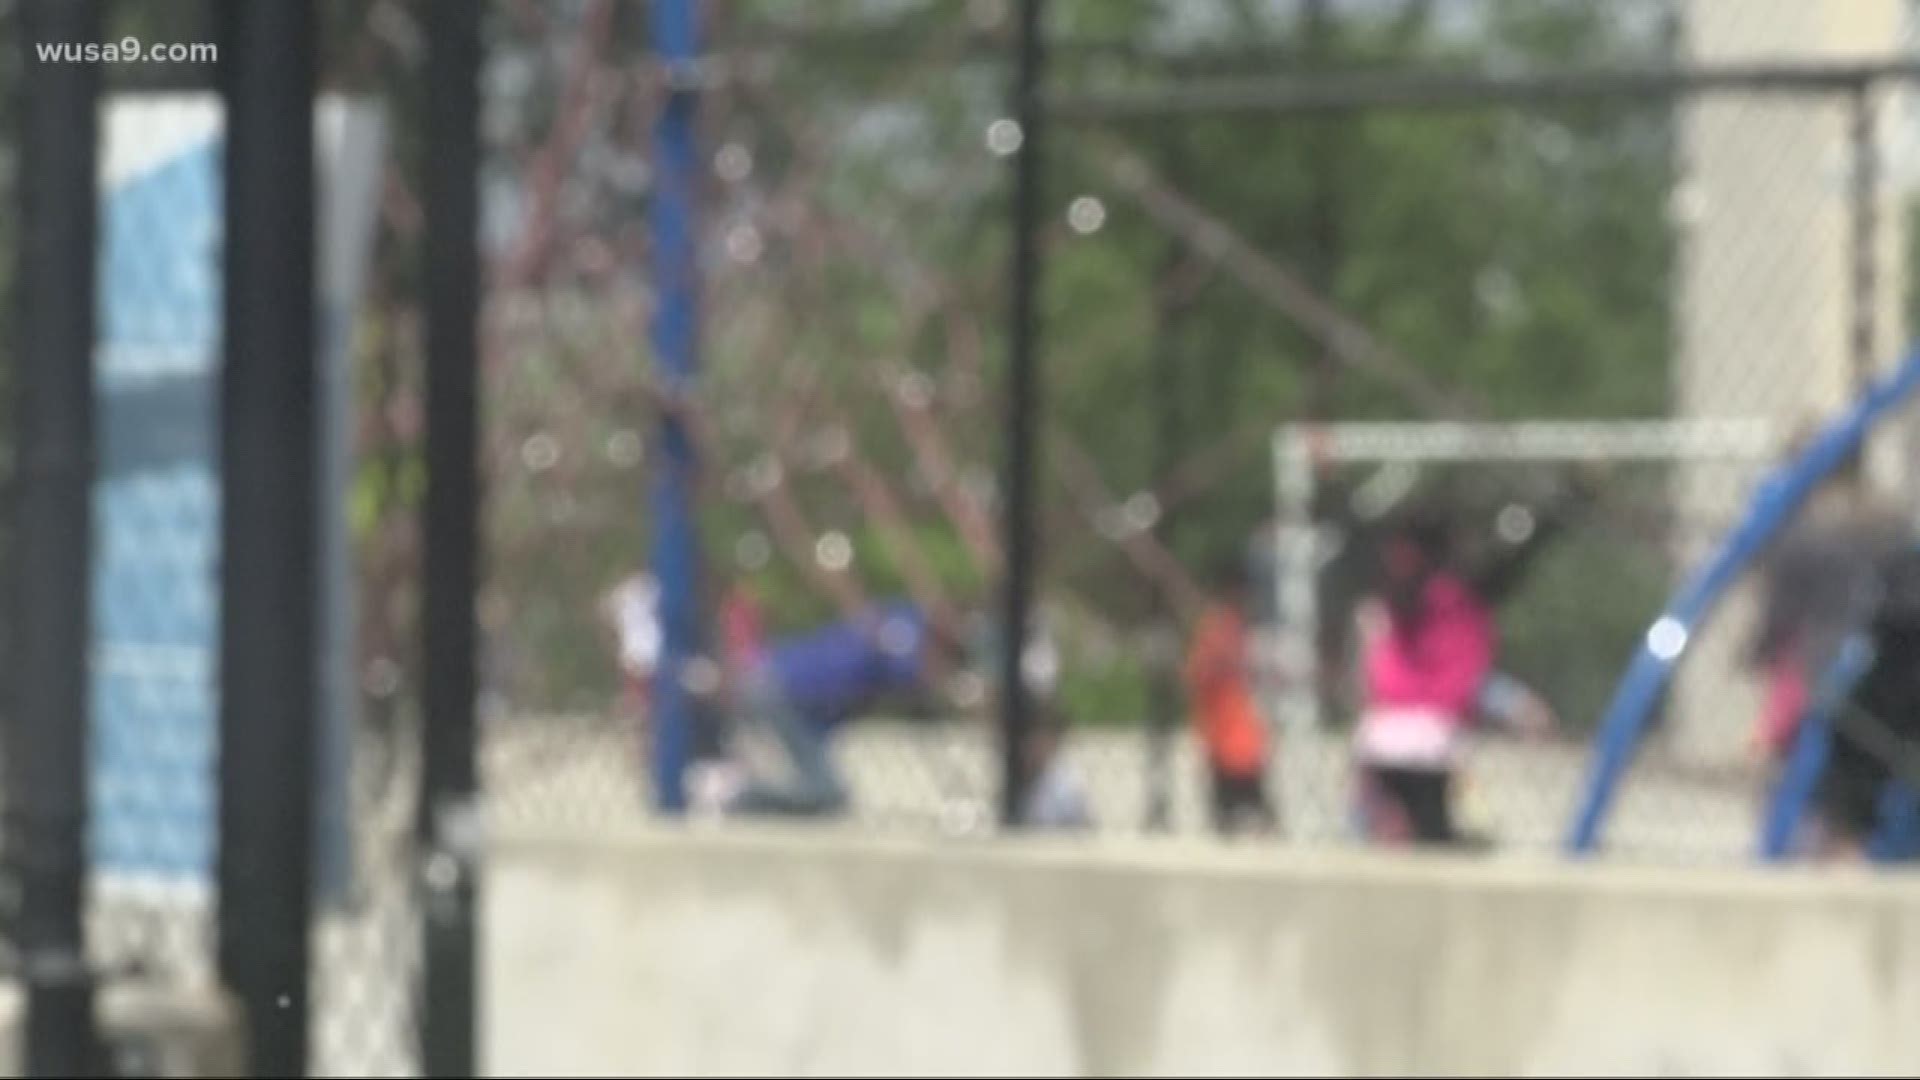 D.C. playgrounds could be exposing your child to dangerously high levels of lead. This comes after a report by an environmental non-profit indicated the rubber cushioning on the playground at Janney Elementary showed high levels of lead.